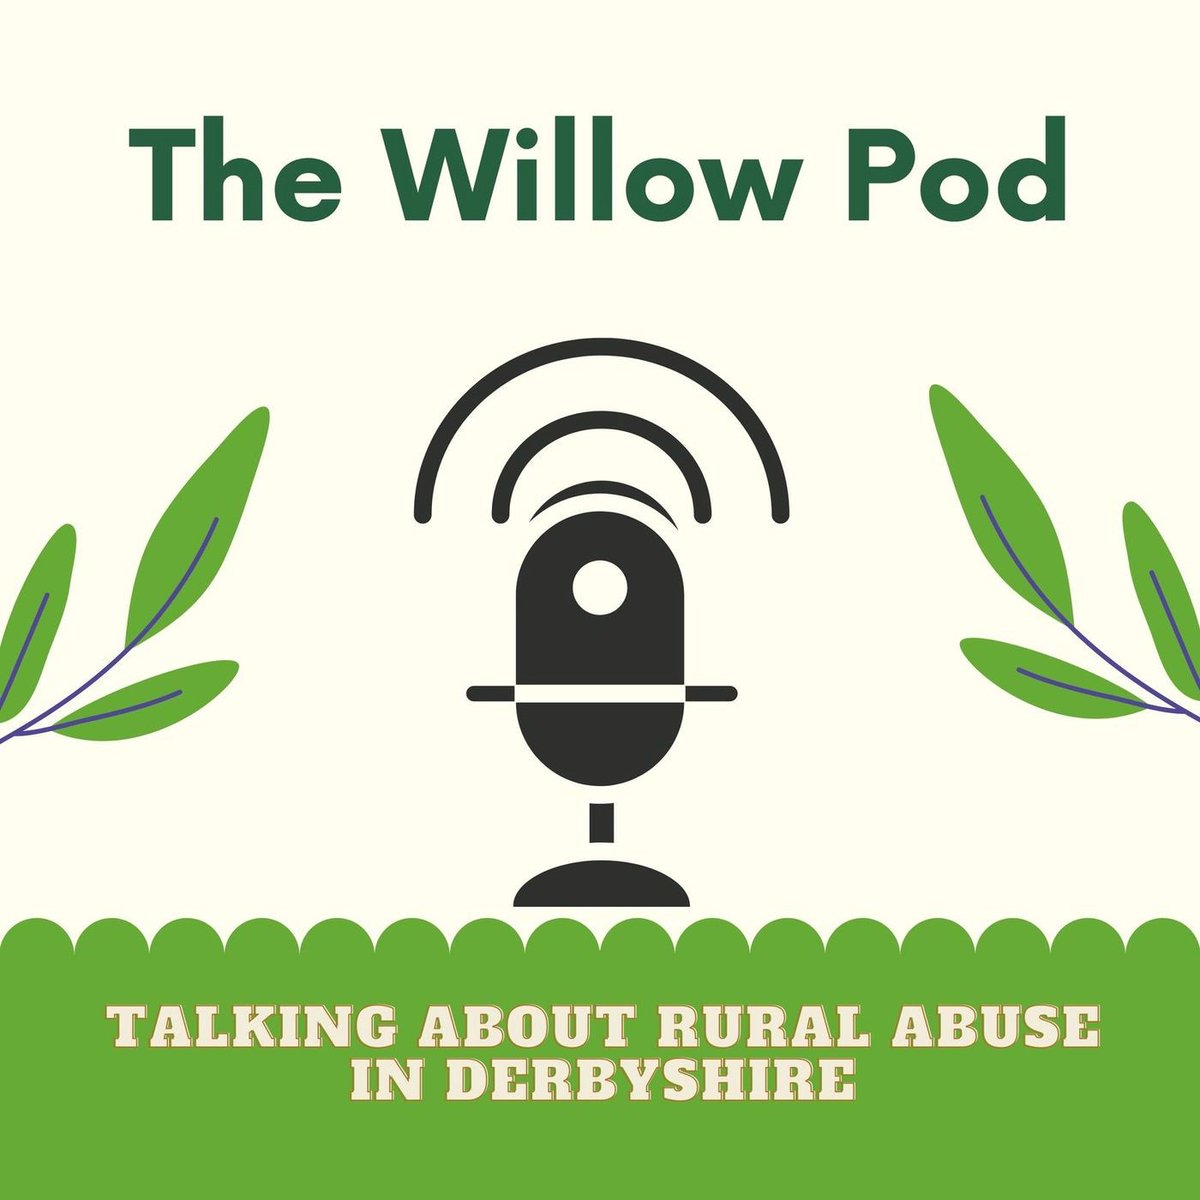 As part of the Rural Crime Week of Action, Sergeant Chris Wilkinson spoke to Emily on The Willow Pod, a podcast from The Willow Project which delivers rural domestic abuse awareness sessions: orlo.uk/s9g5d To find out more visit orlo.uk/9W4Yq #RuralCrime